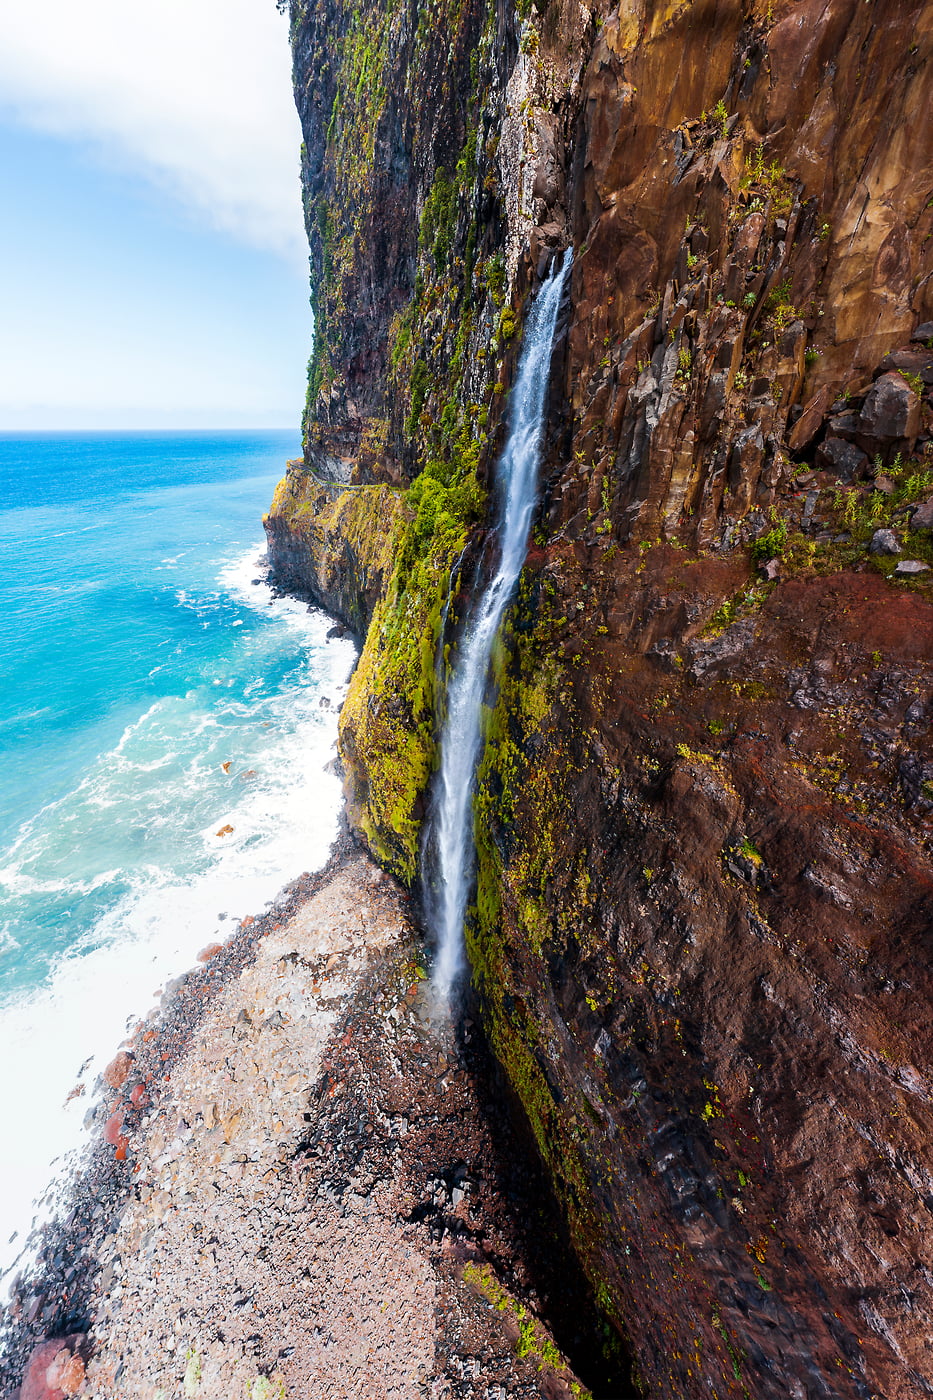 150 megapixels! A very high resolution, large-format VAST photo print of a waterfall along the Madeira coastline; photograph created by Roberto Moiola in Seixal, Madeira, Portugal